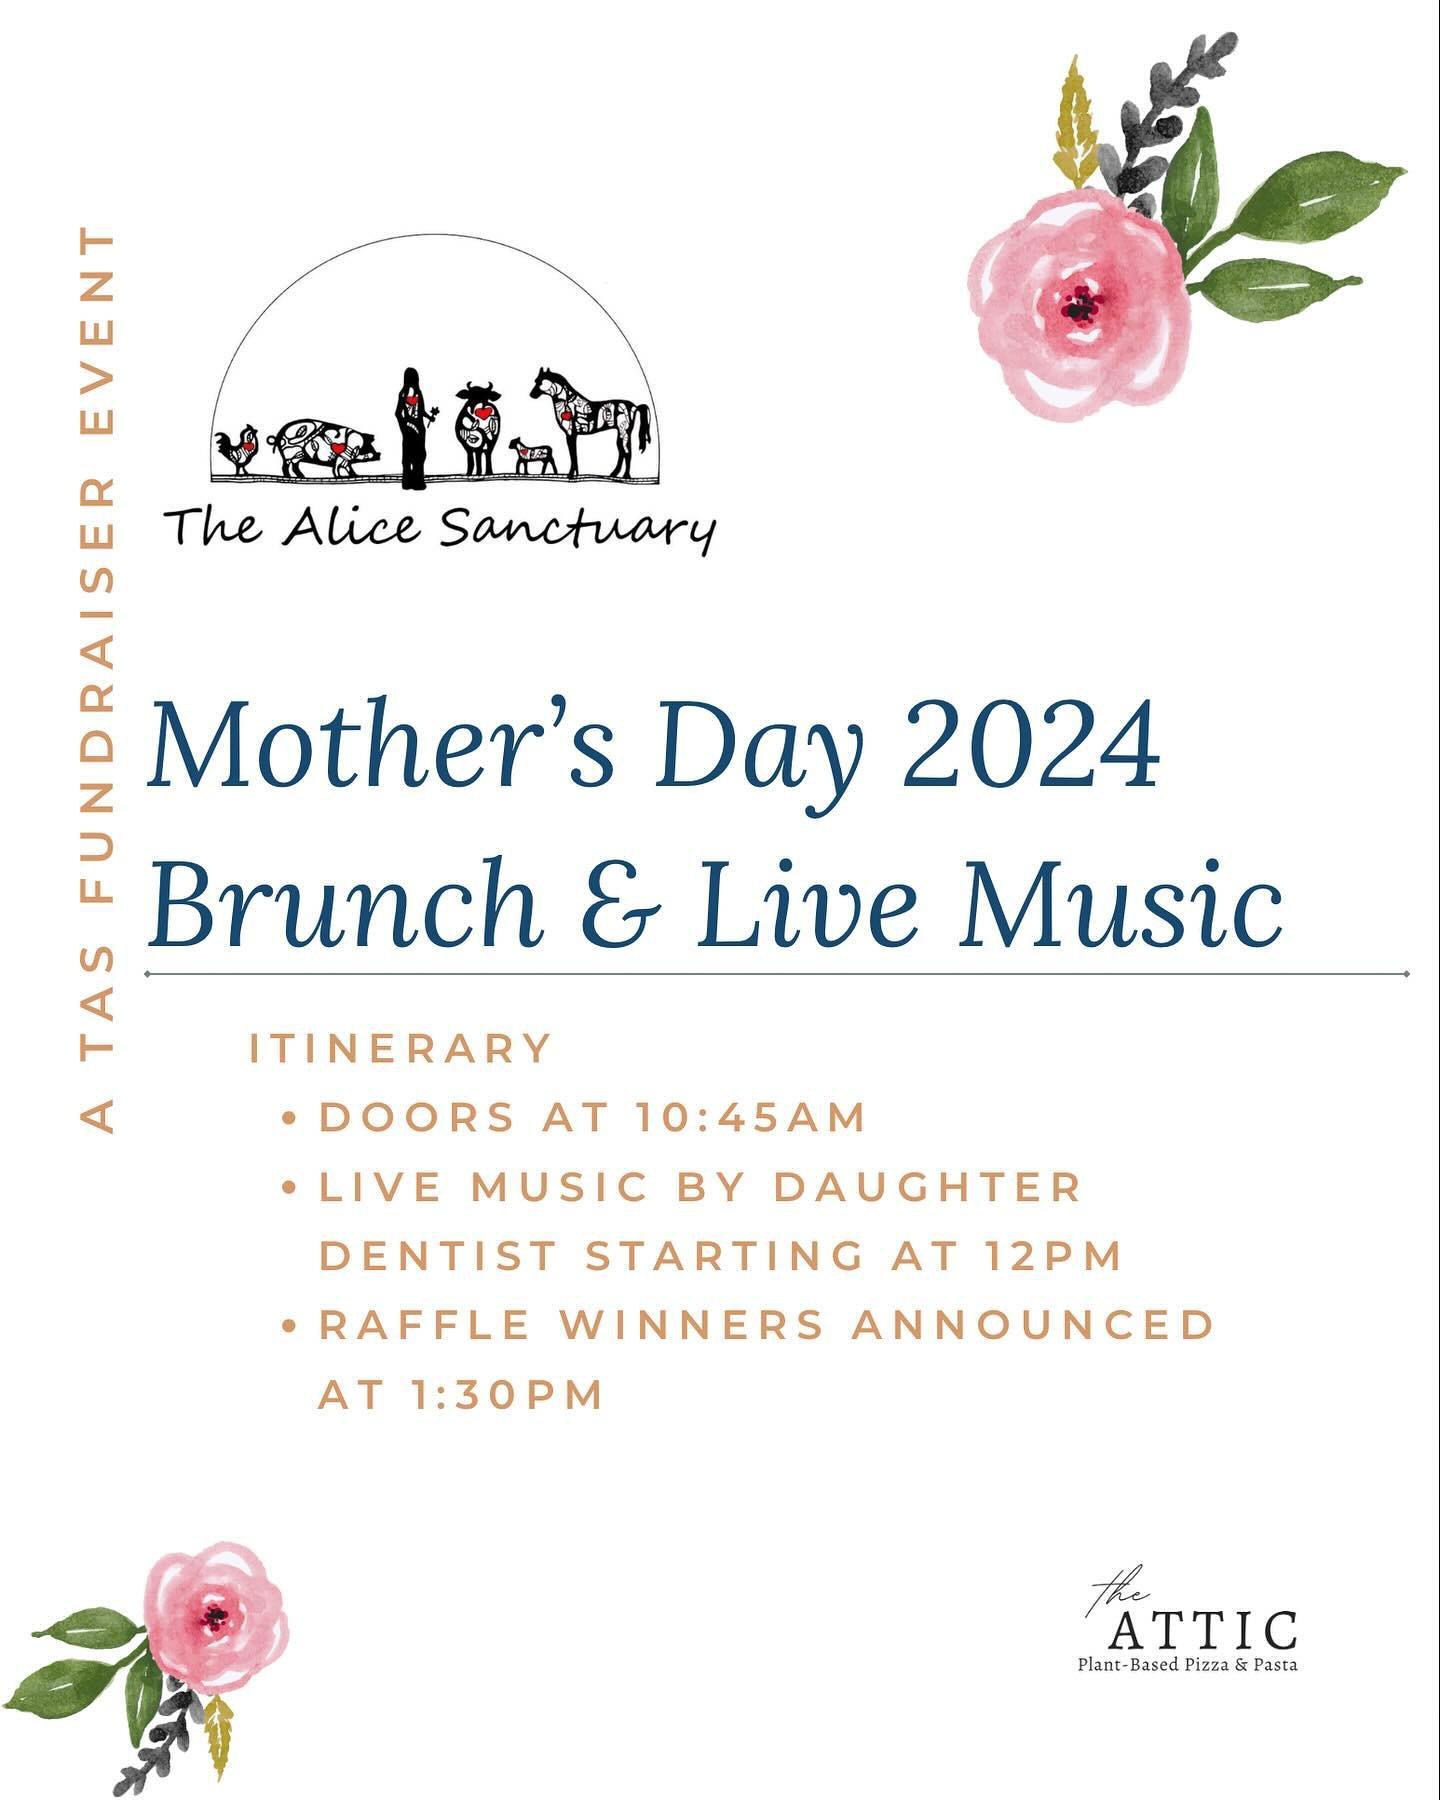 We are hosting a Mother&rsquo;s Day brunch at @theatticyyc this year, in support of @thealicesanctuary 🐷🐮❤️💐

Your ticket includes your choice of brunch, a mimosa (non-alcoholic version available), coffee or tea, live music by @daughterdentist at 